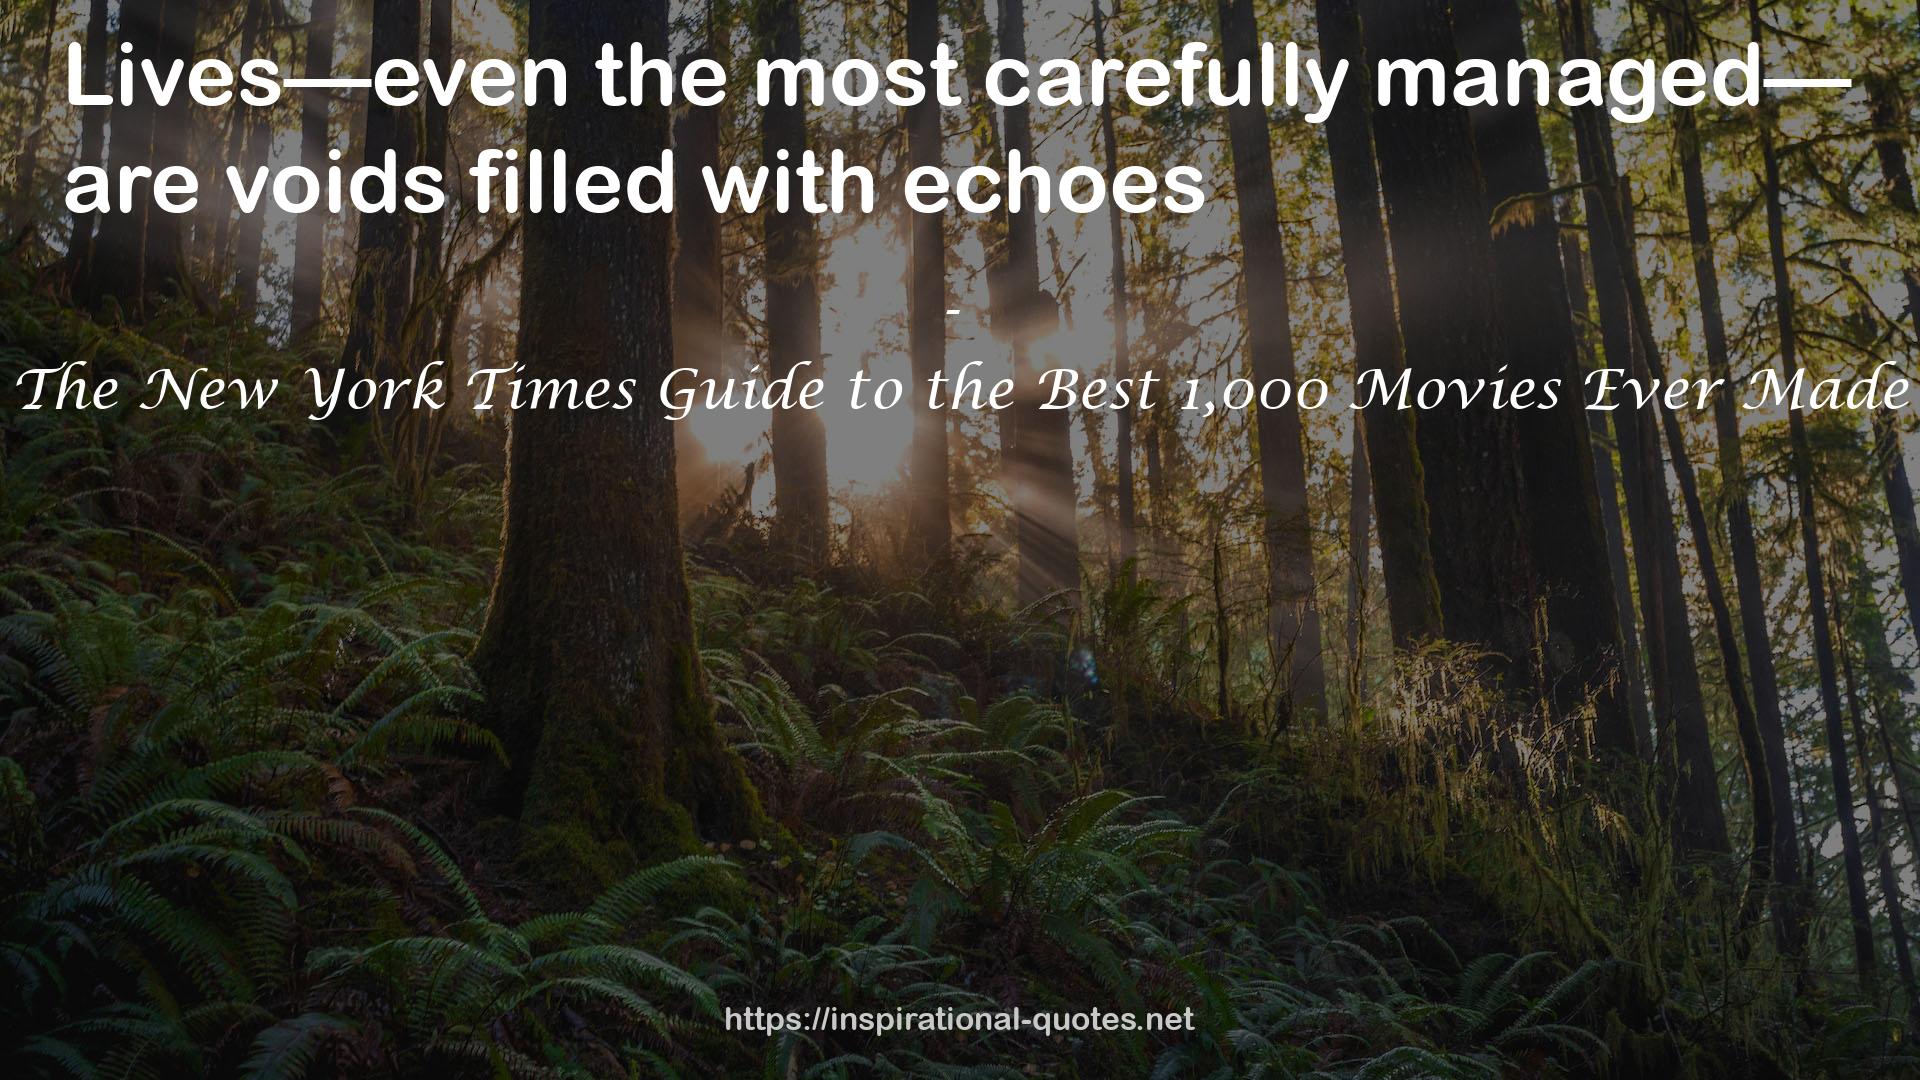 The New York Times Guide to the Best 1,000 Movies Ever Made QUOTES